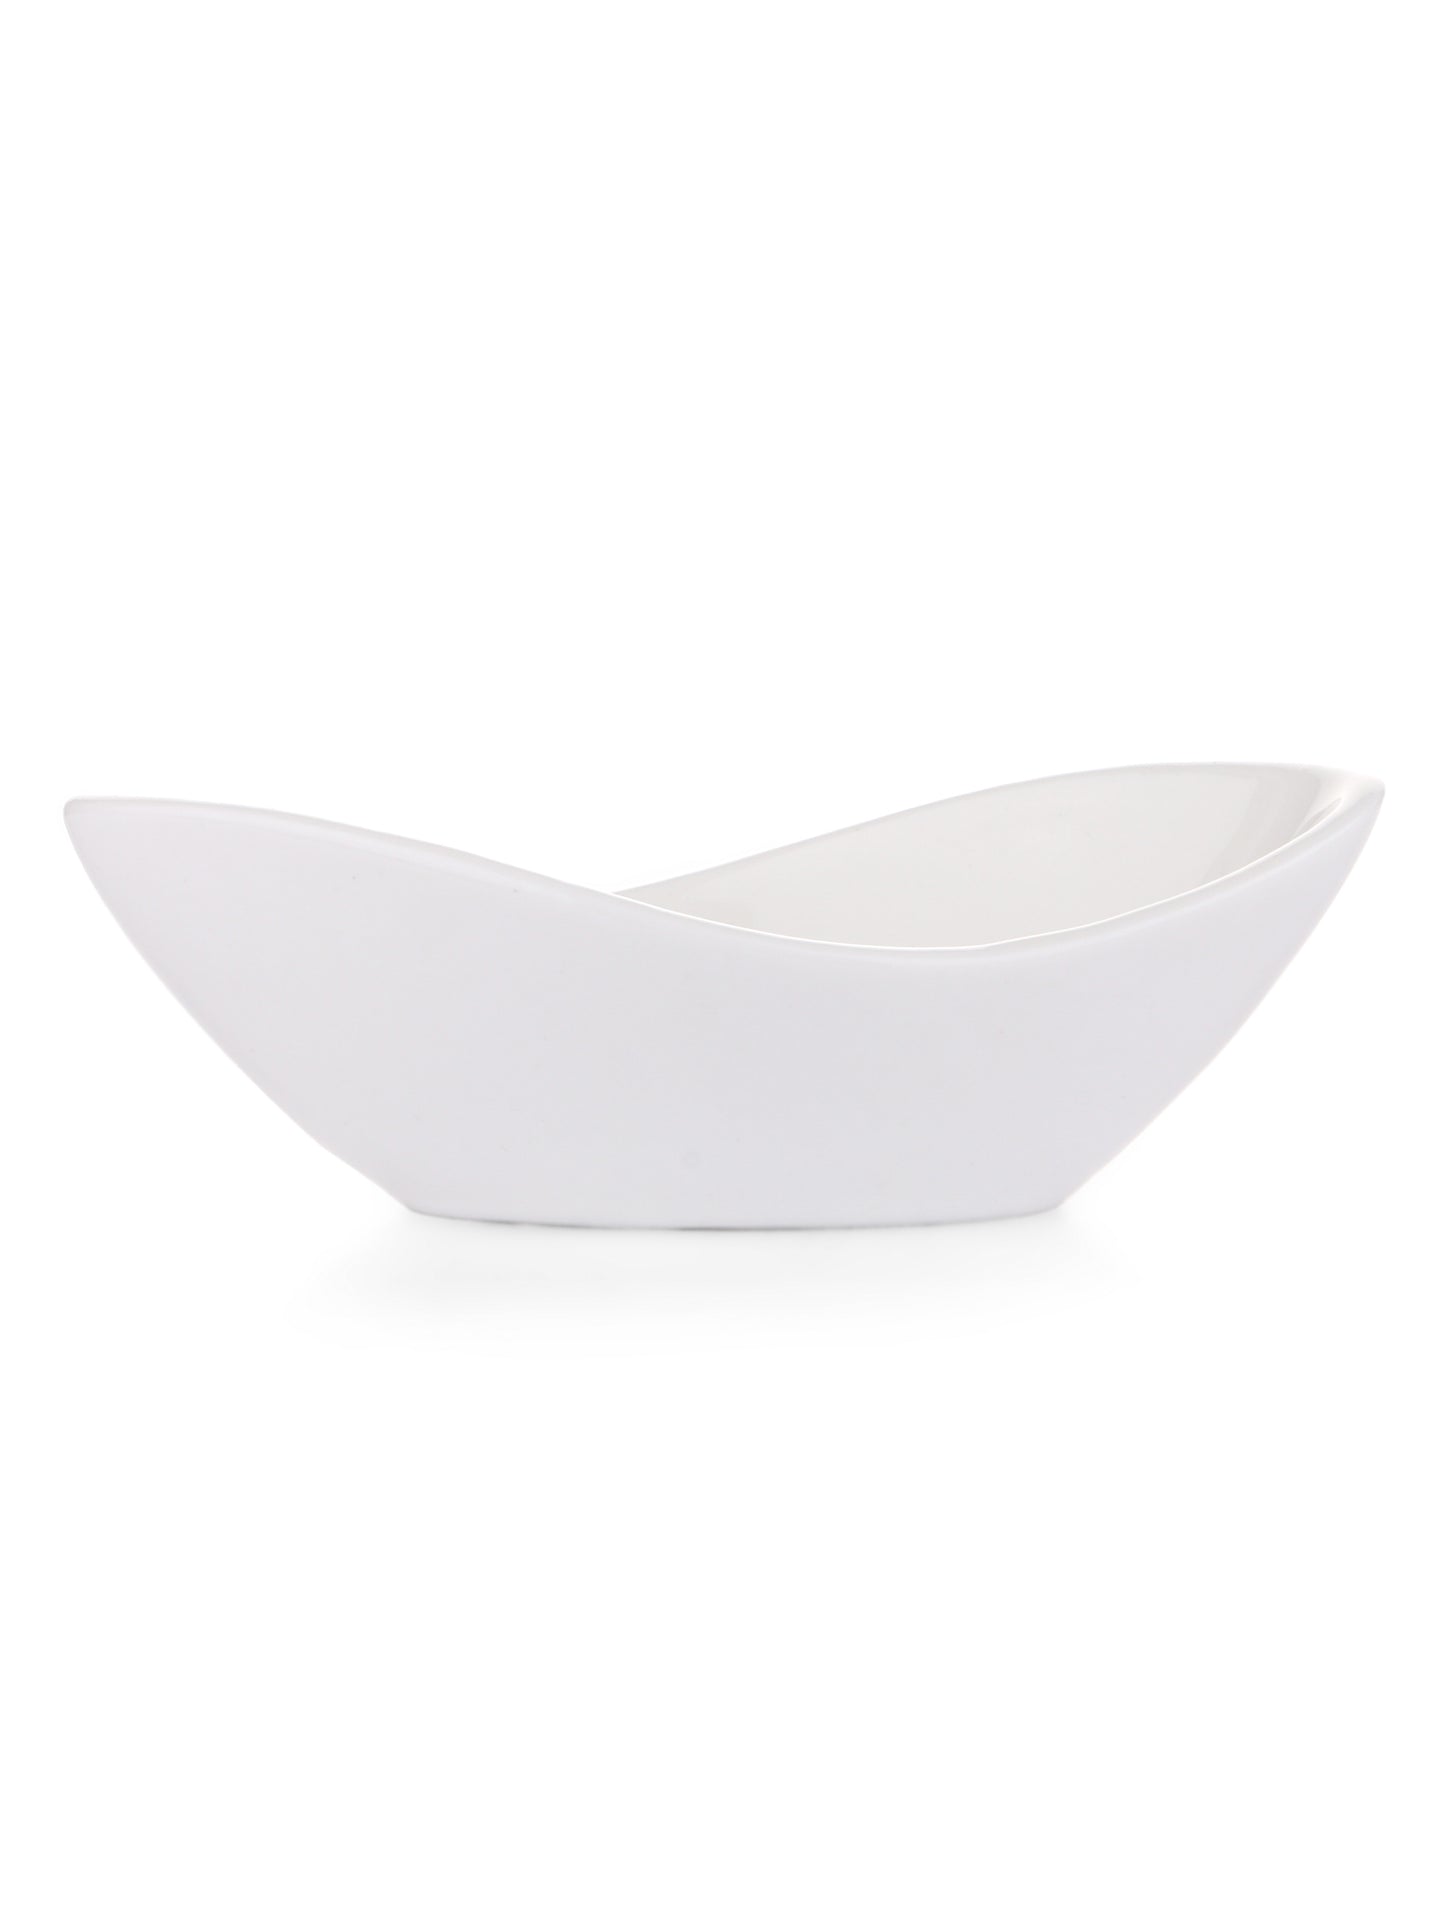 Clay Craft Boat Shaped Condiment/Dipping Bowls Set of 4 - 50 ml each